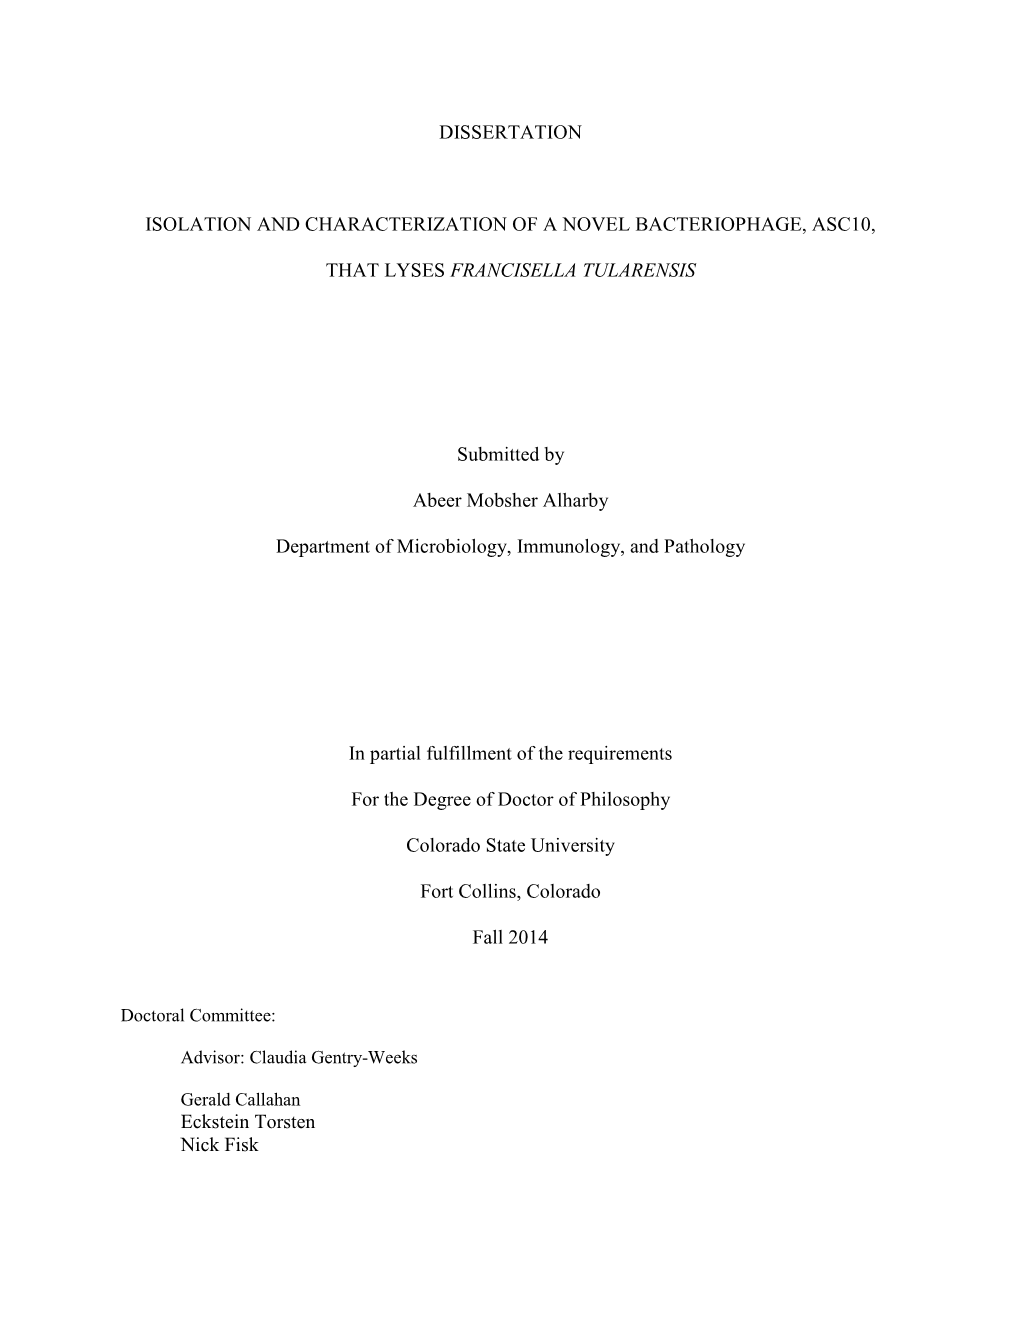 Dissertation Isolation and Characterization of A